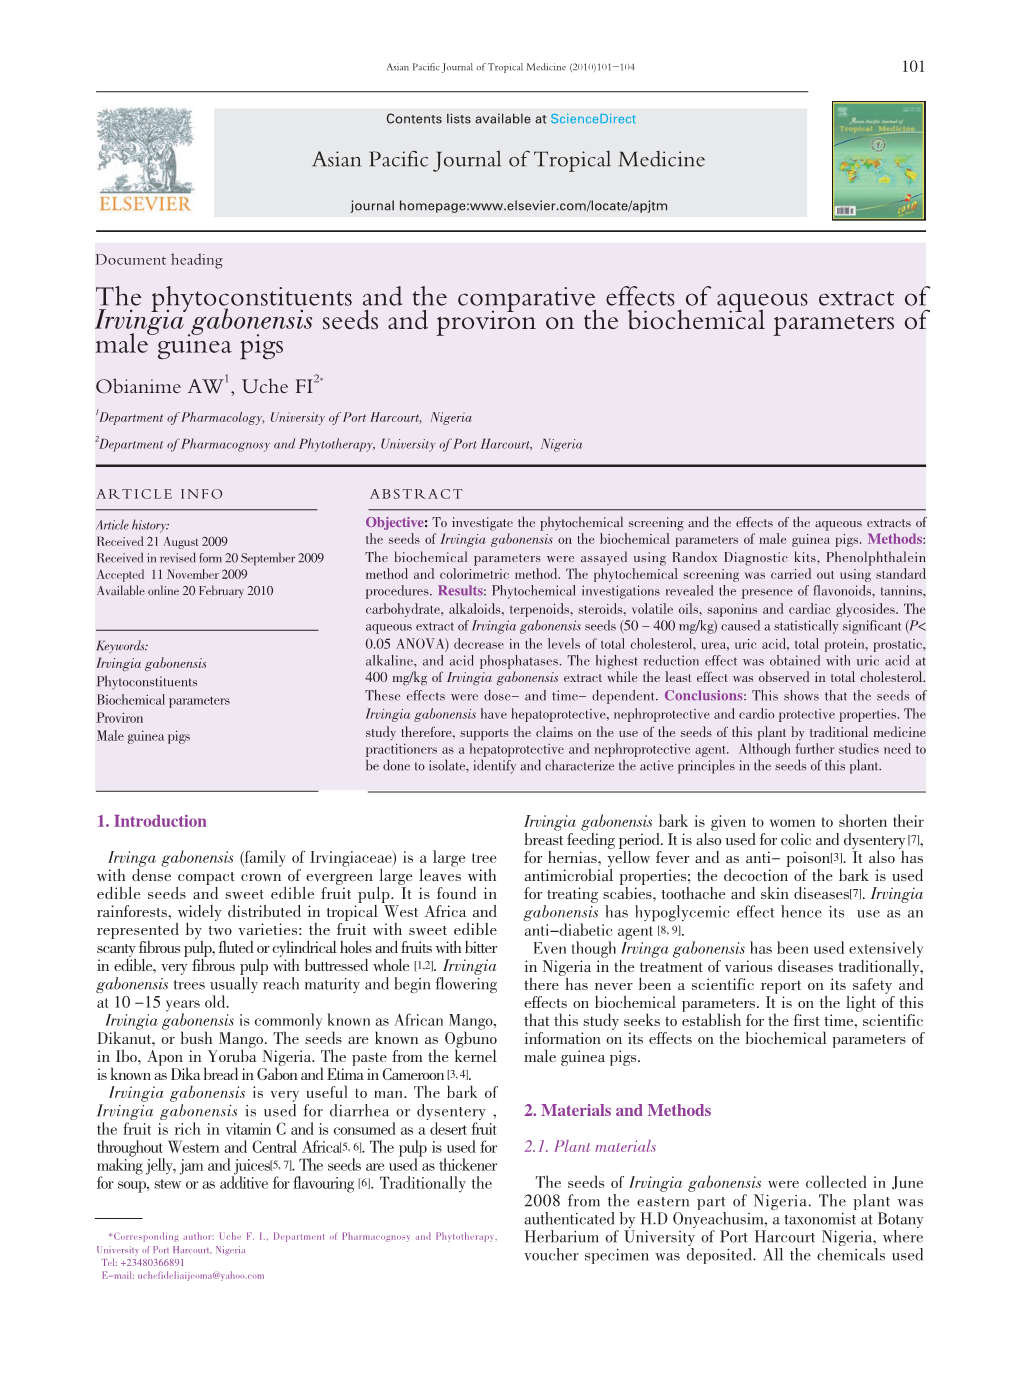 The Phytoconstituents and the Comparative Effects of Aqueous Extract of Irvingia Gabonensis Seeds and Proviron on the Biochemical Parameters of Male Guinea Pigs